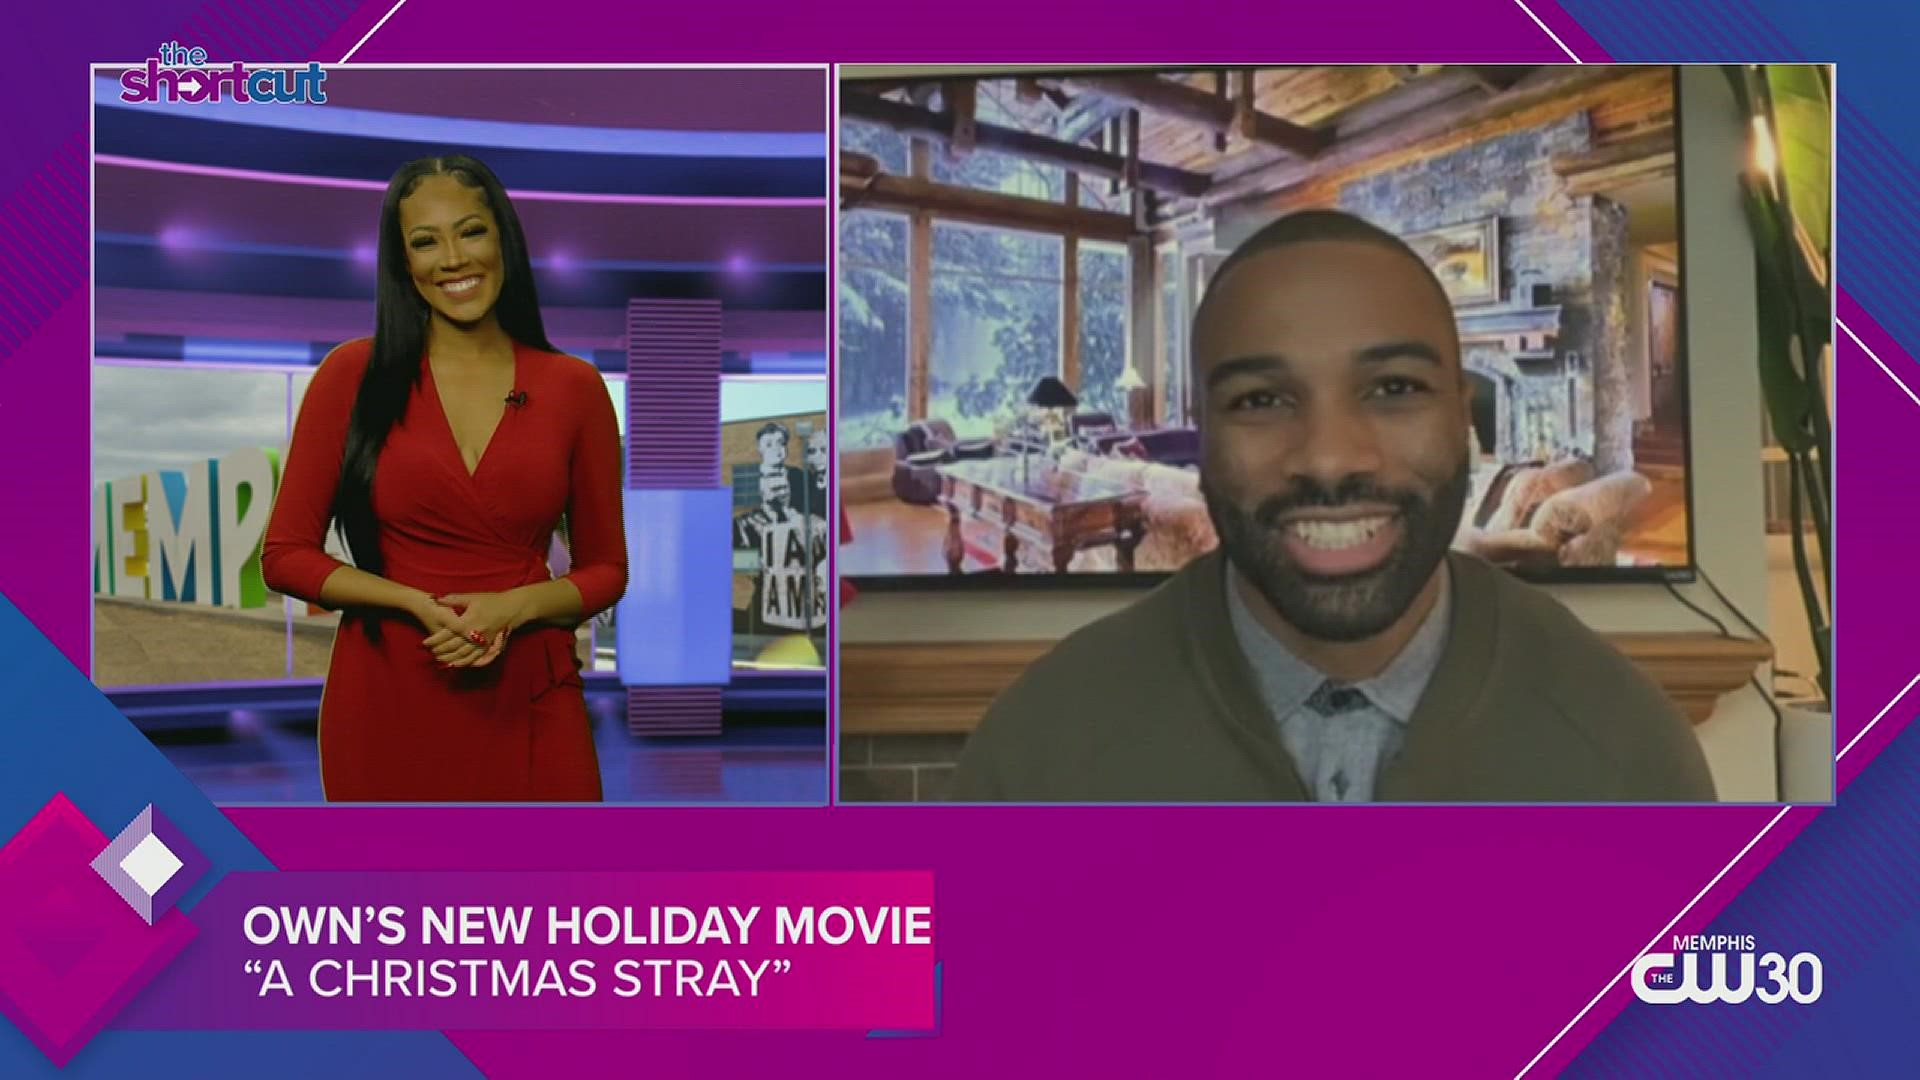 In celebration of "the most wonderful time of the year," catch "A Christmas Stray" on the Oprah Winfrey Network. Featuring actor Andrea Fuller and Canadian snow!